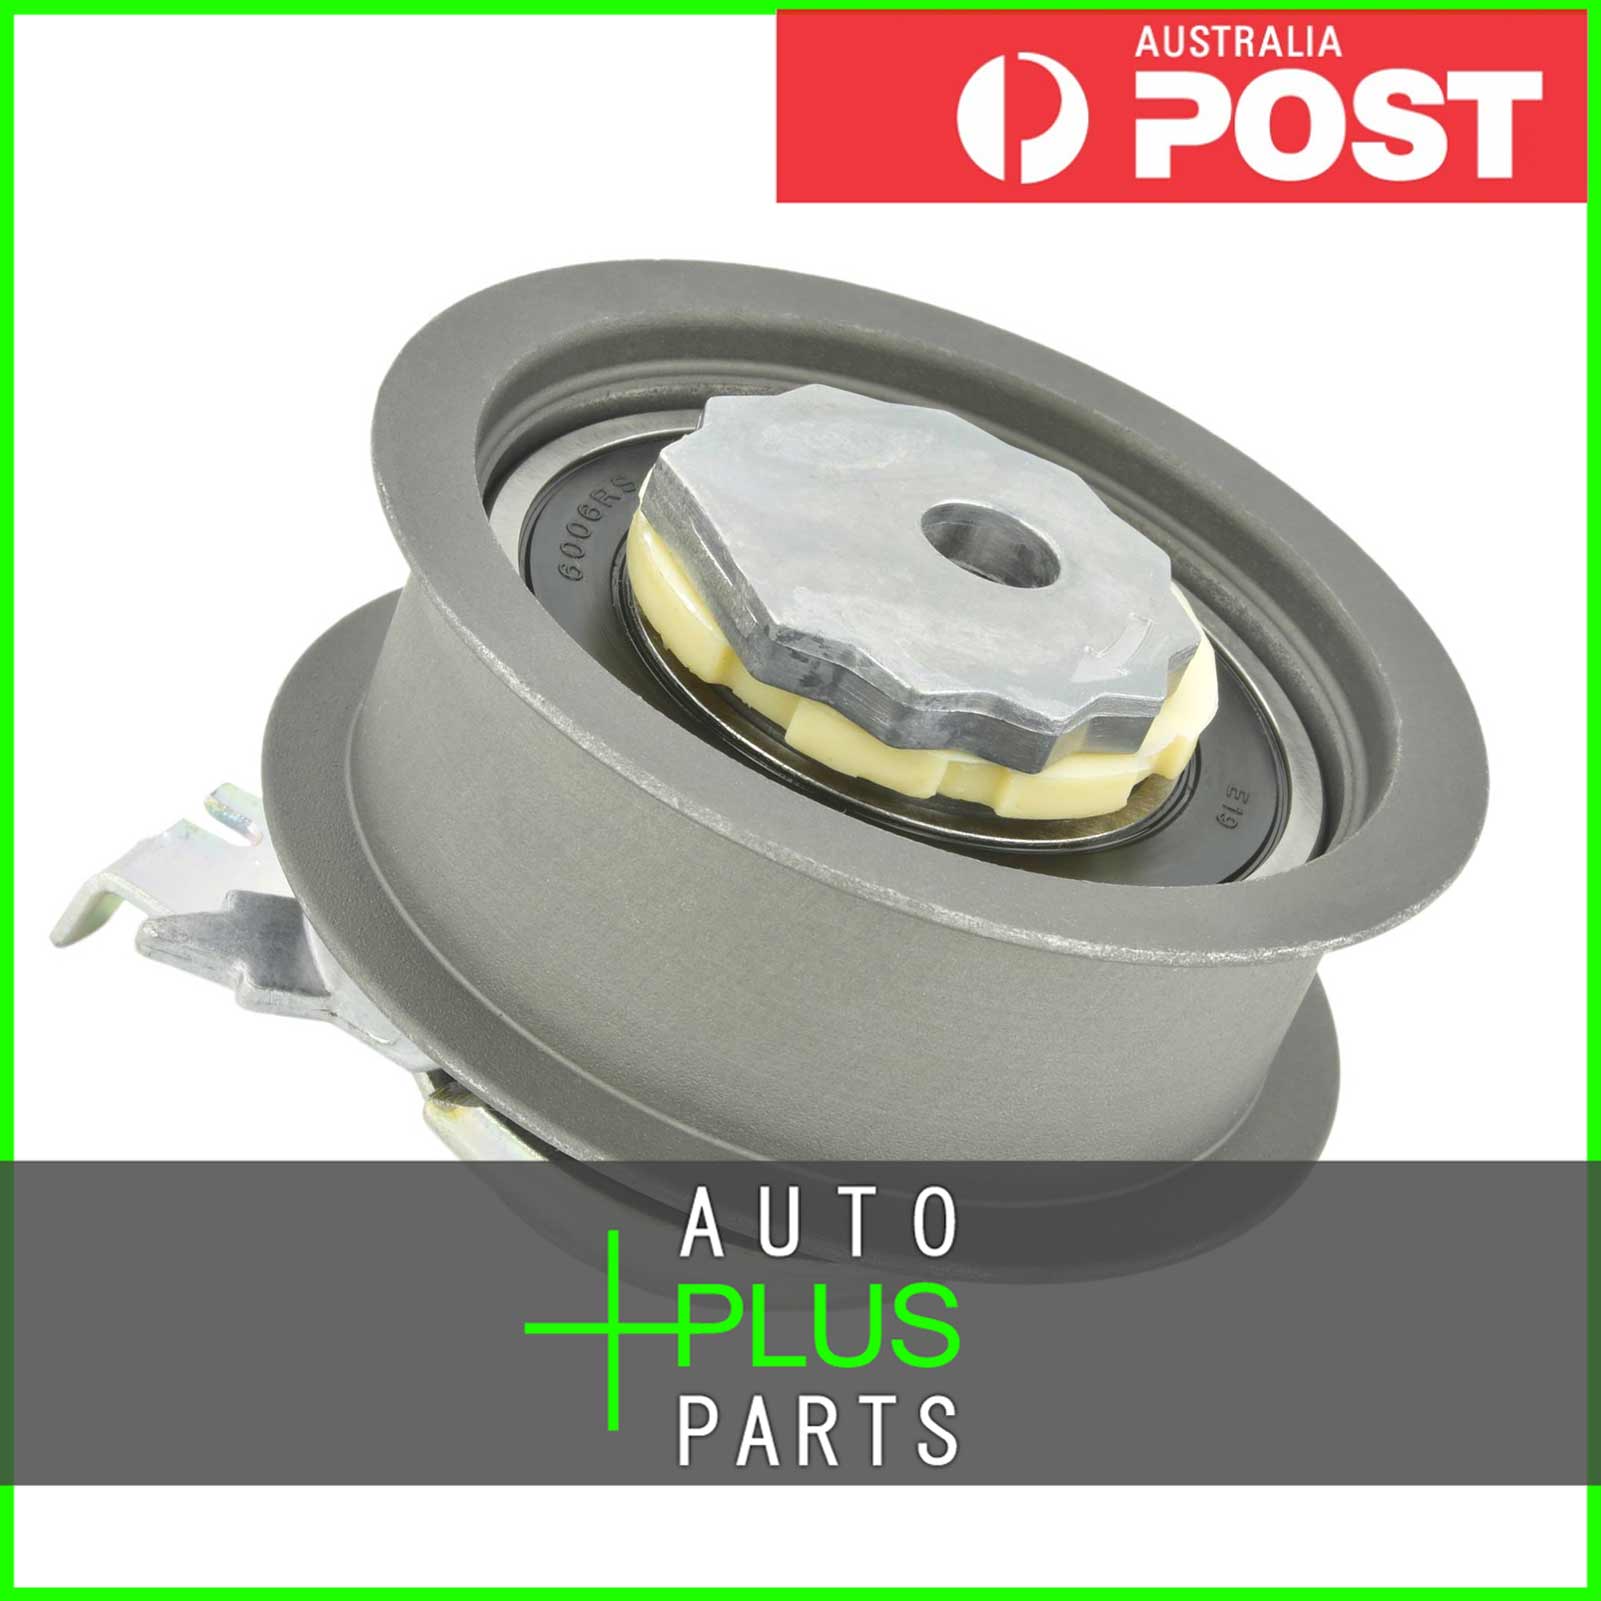 Fits VOLKSWAGEN GOLF/GOLF TIMING BELT TENSIONER PULLEY - R32 Product Photo